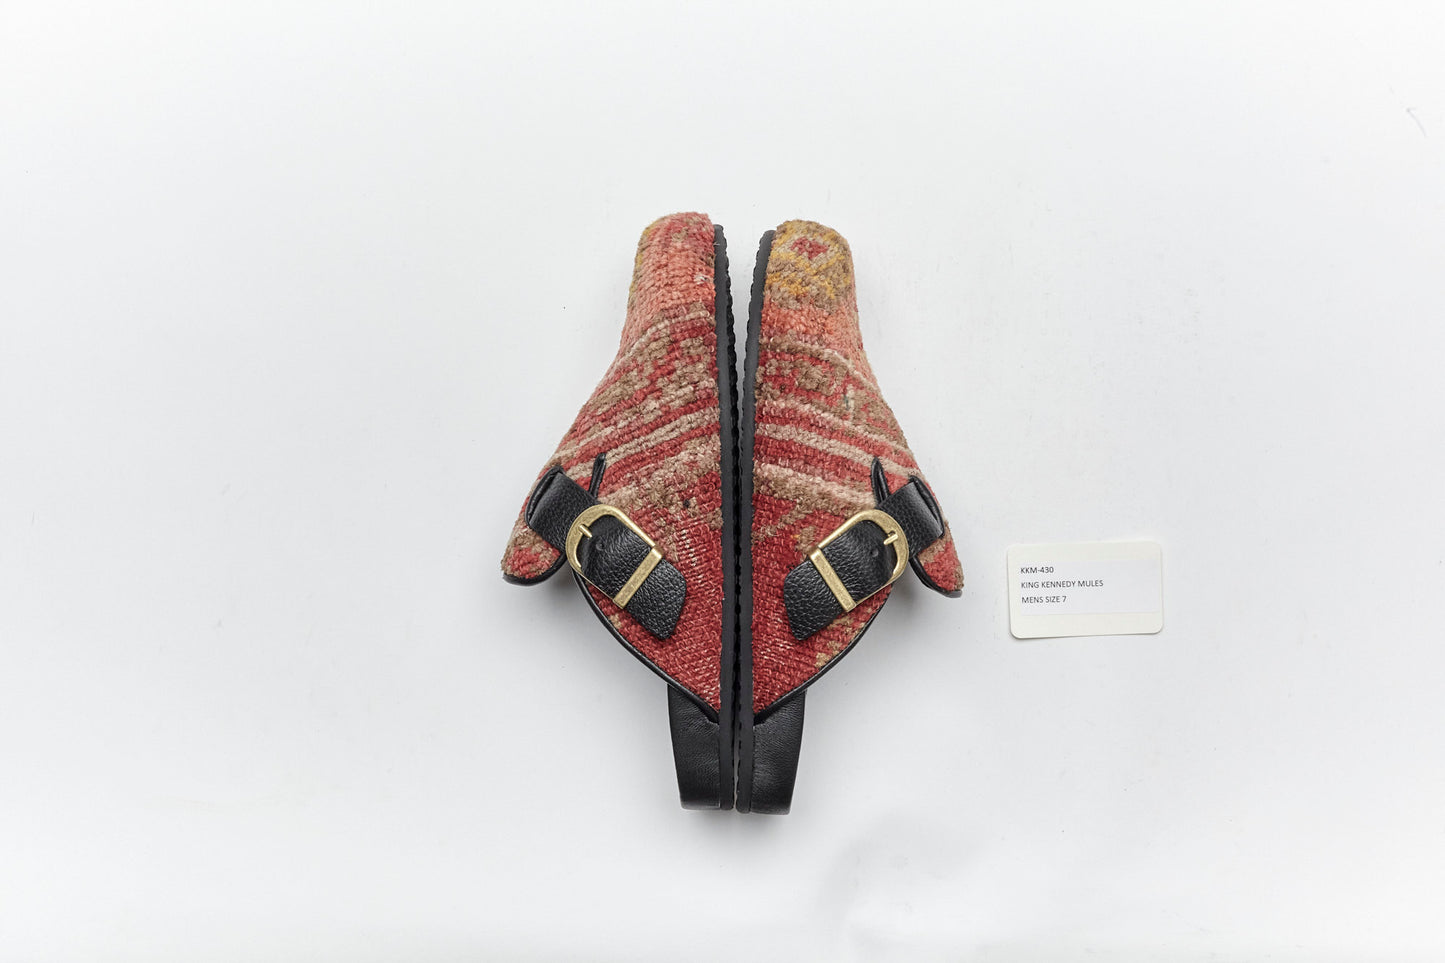 Side view with brass buckles of King Kennedy Rug Mules.  King Kennedy Rug Mules are one-of-a-kind and made of 100 year old antique Persian rug fragments with soft lambskin footbed and comfortable rubber sole. This pair is made of an antique hand knotted Persian rug with pink, red and yellow tones. 